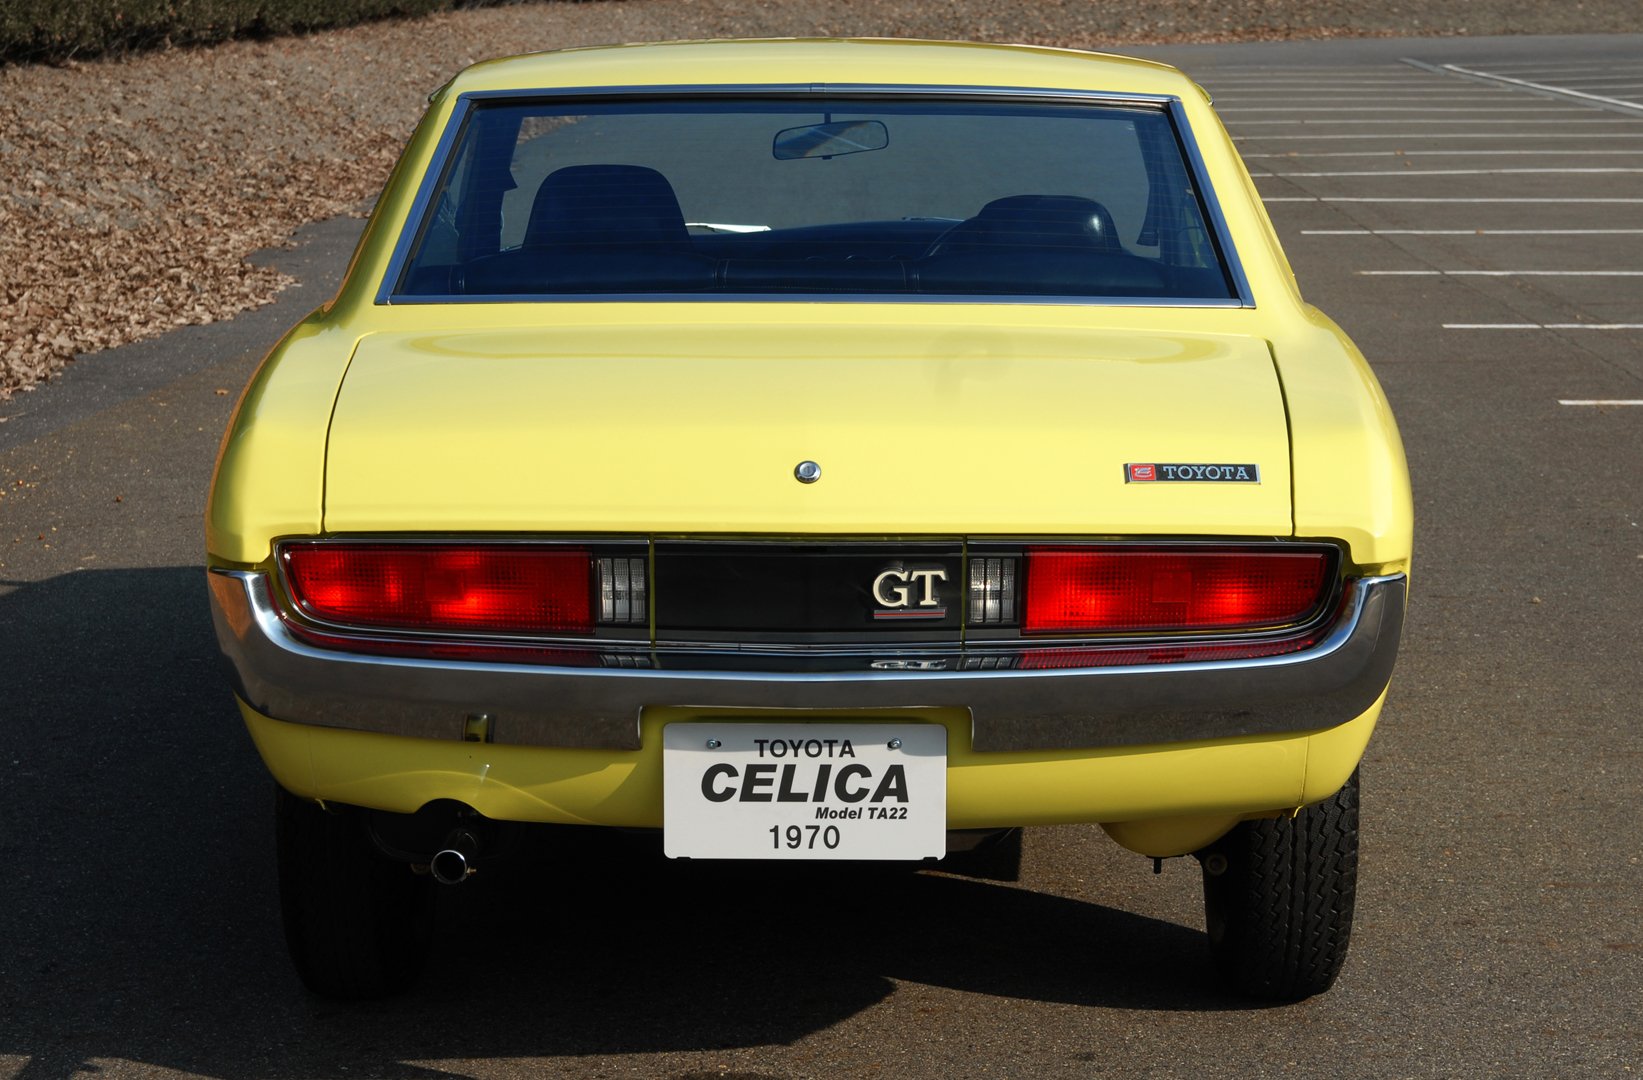 HQ Toyota Celica Ta22 Gt Wallpapers | File 264.57Kb